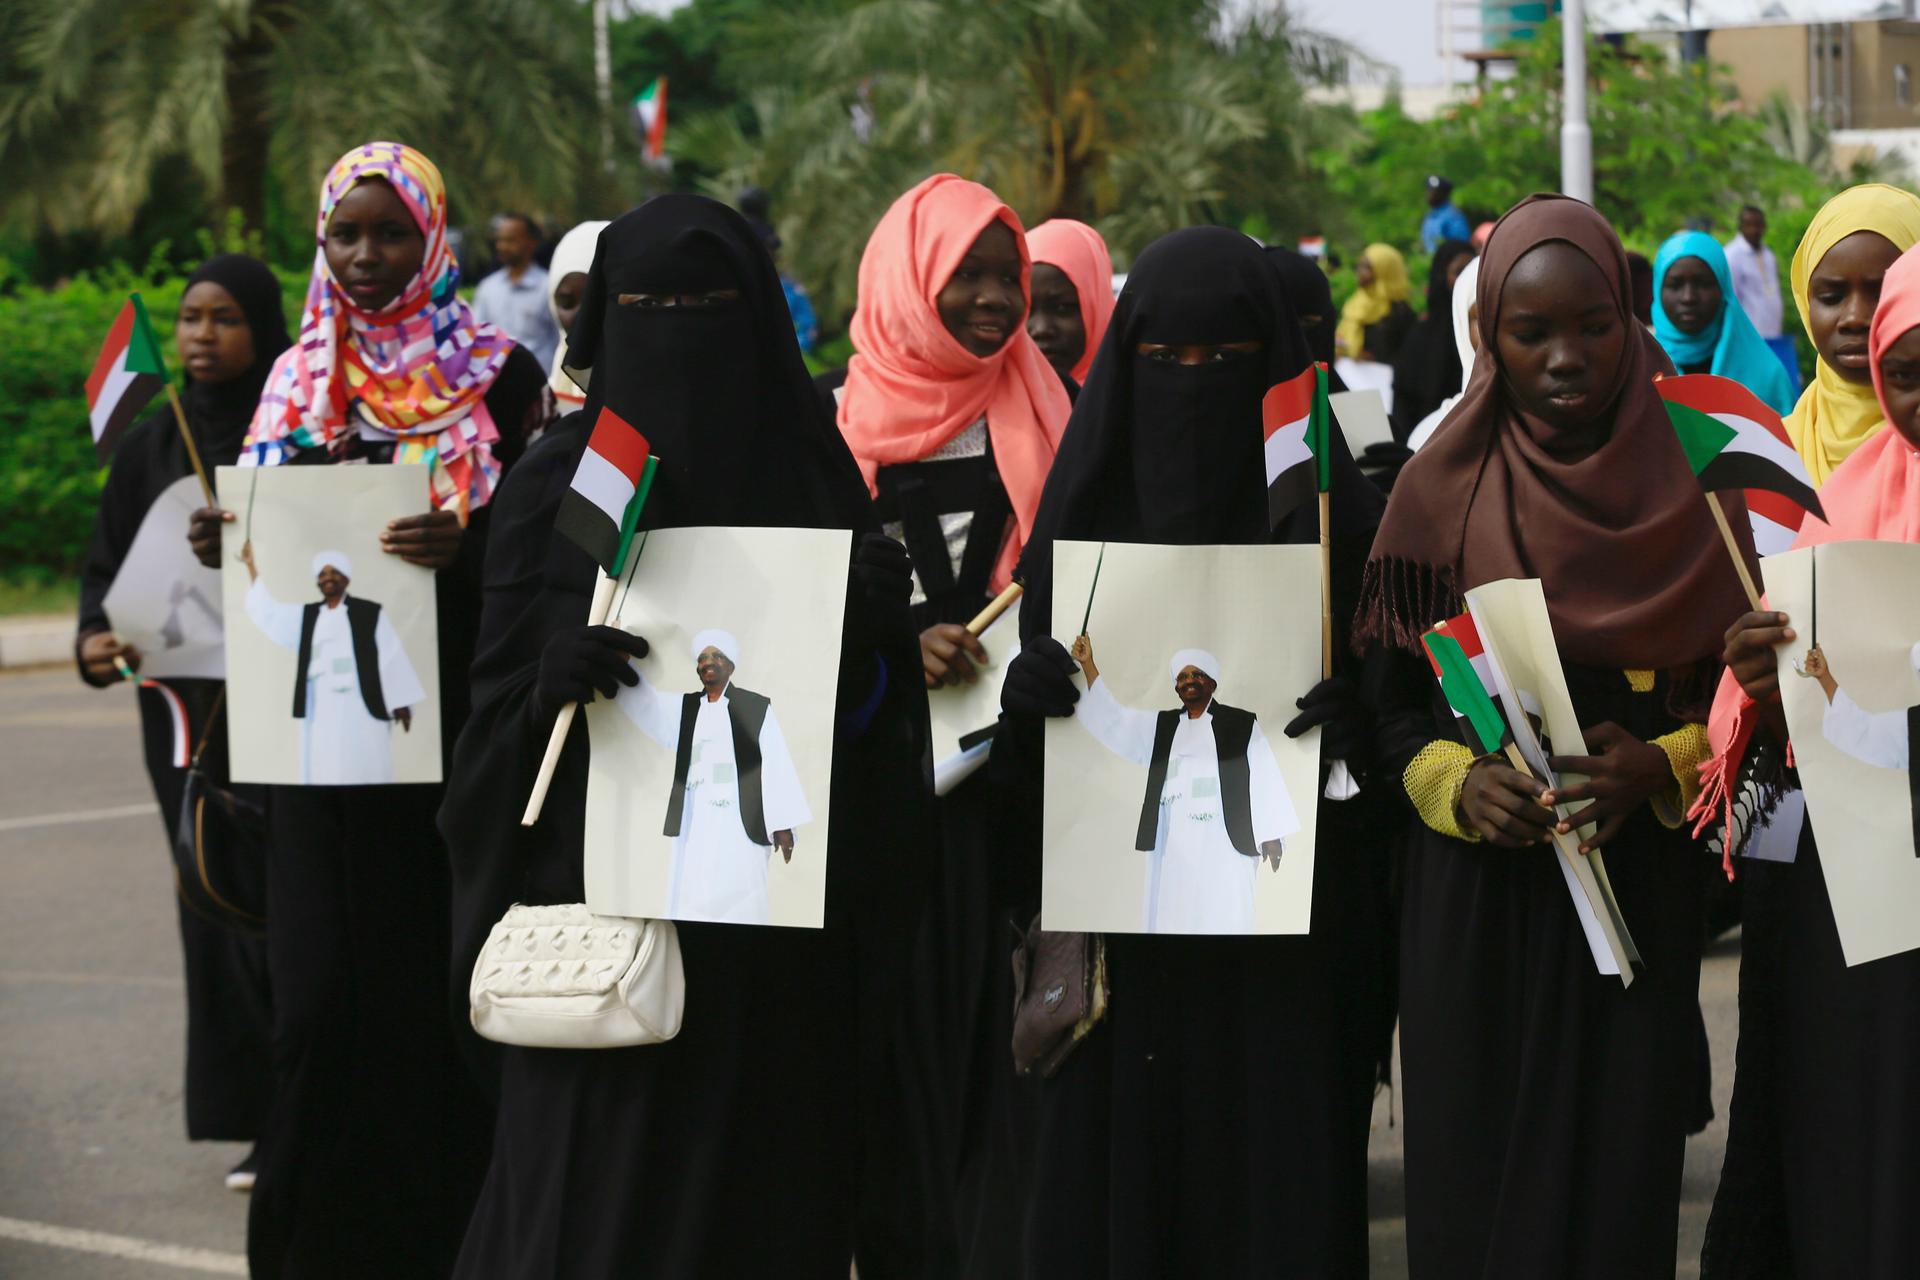 Supporters carry images of Sudanese President Omar al-Bashir during a rally against the International Criminal Court, at Khartoum Airport in Sudan, July 30, 2016. The ICC has indicted Bashir for genocide and other war crimes in connection to the Darfur co